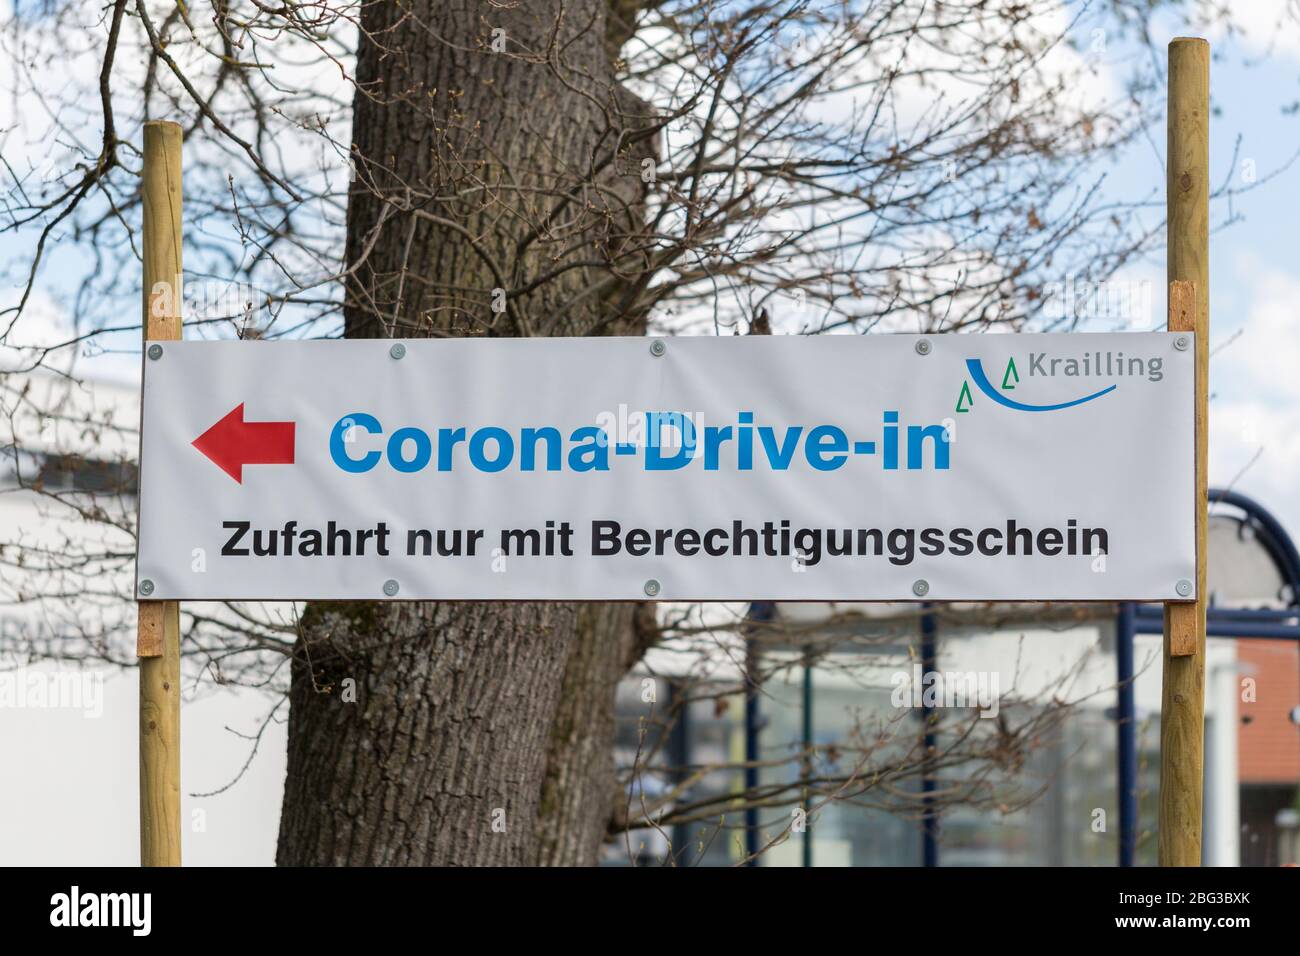 Corona Drive-In sign. The text below indicates that only entitled persons (with a document from a doctor) will be tested for the Coronavirus. Stock Photo